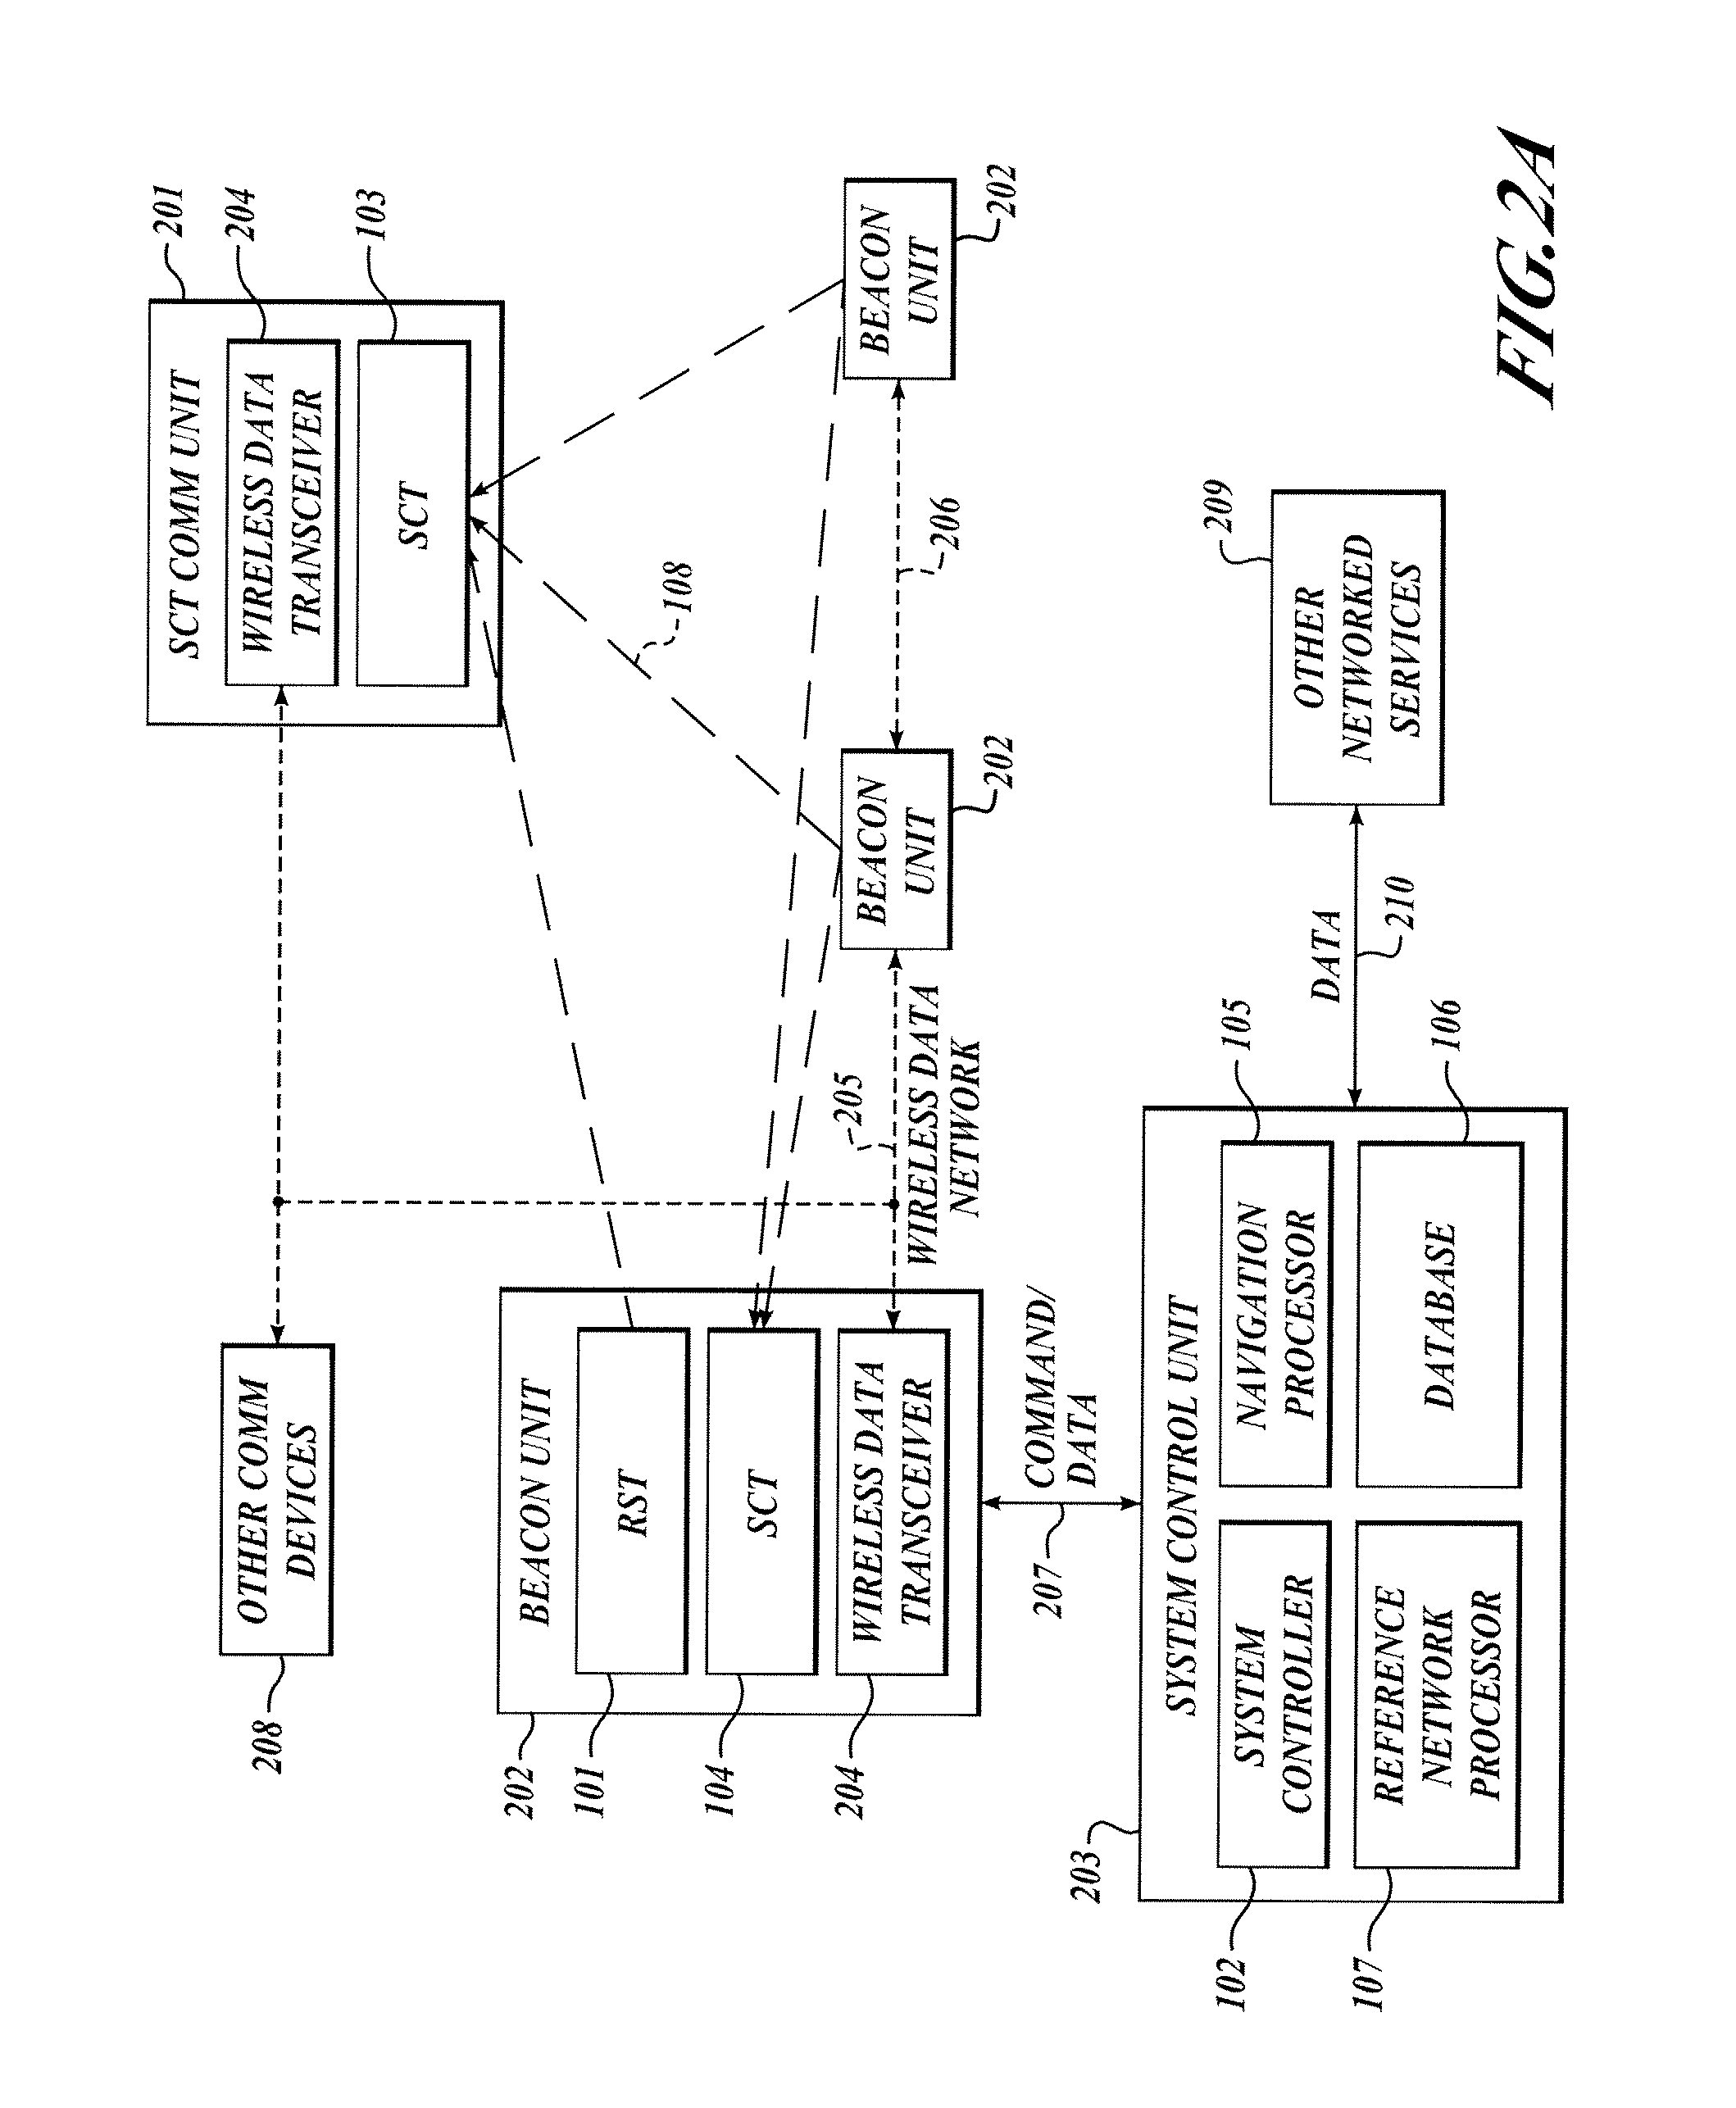 System and method for positioning in configured environments